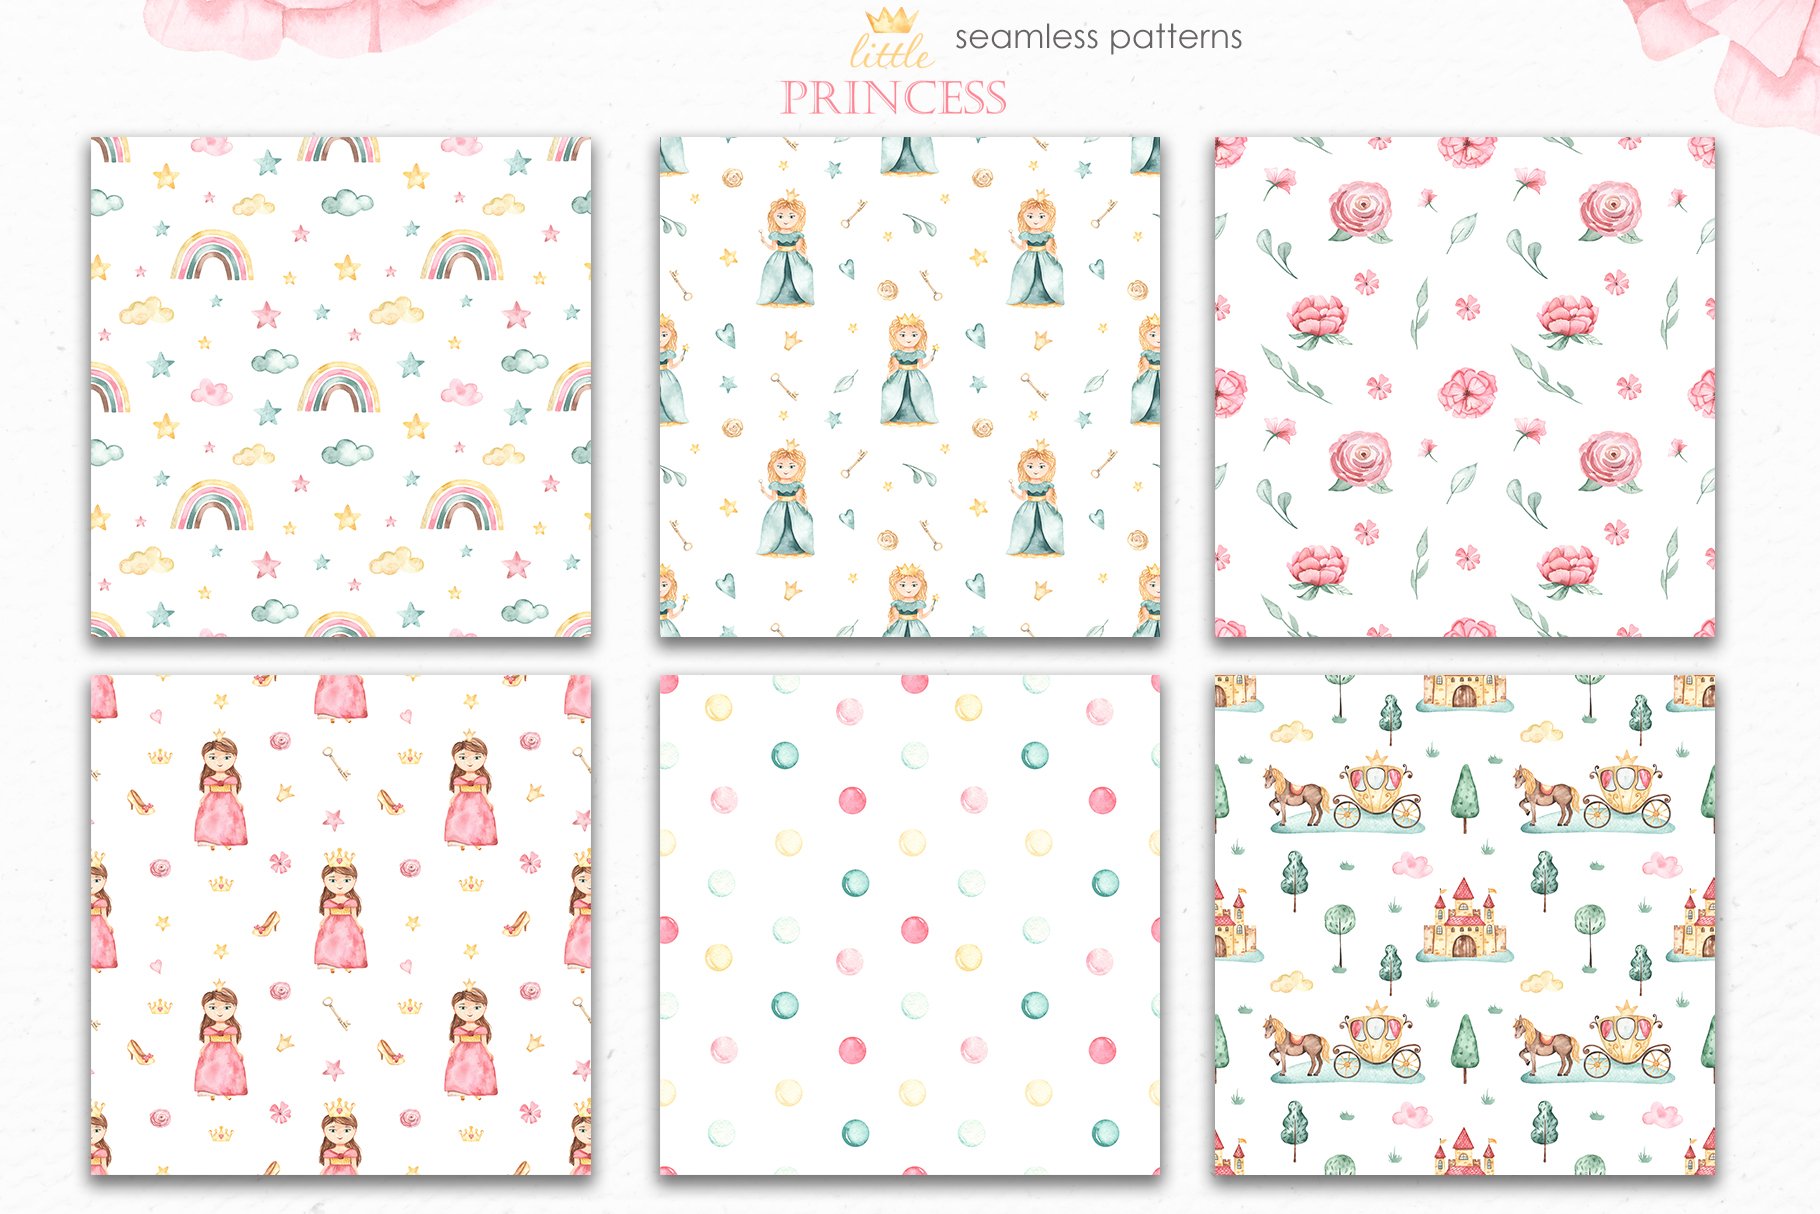 8 watercolor little princess childrens collection seamless patterns 399